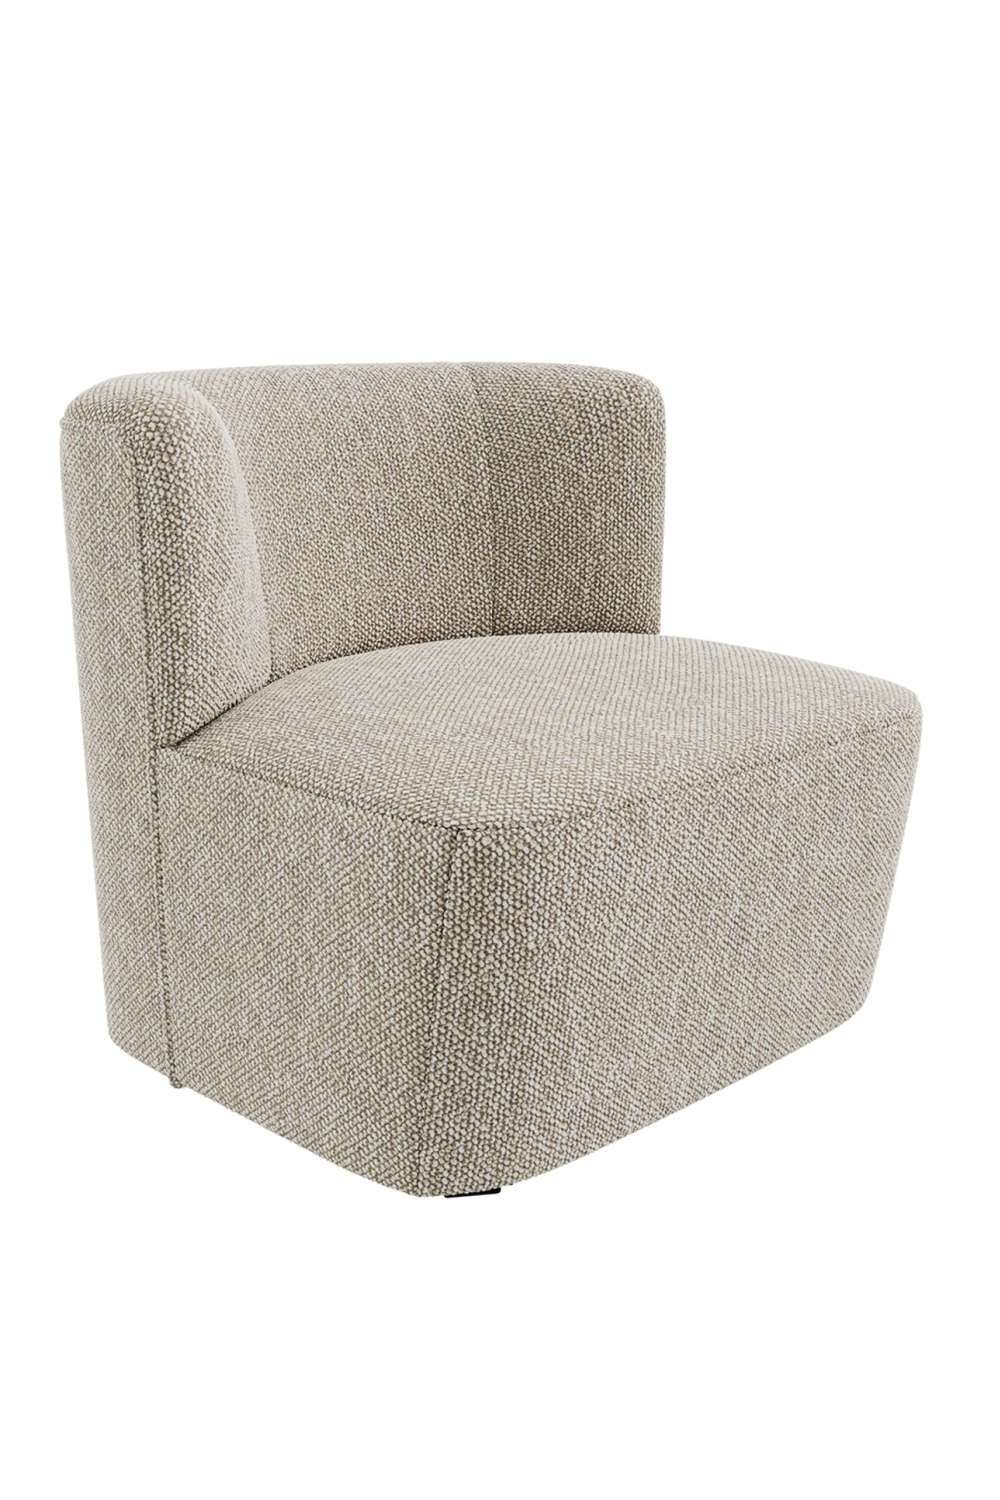 Upholstered One-Seater Sofa | Dome Deco Abel | Oroa.com